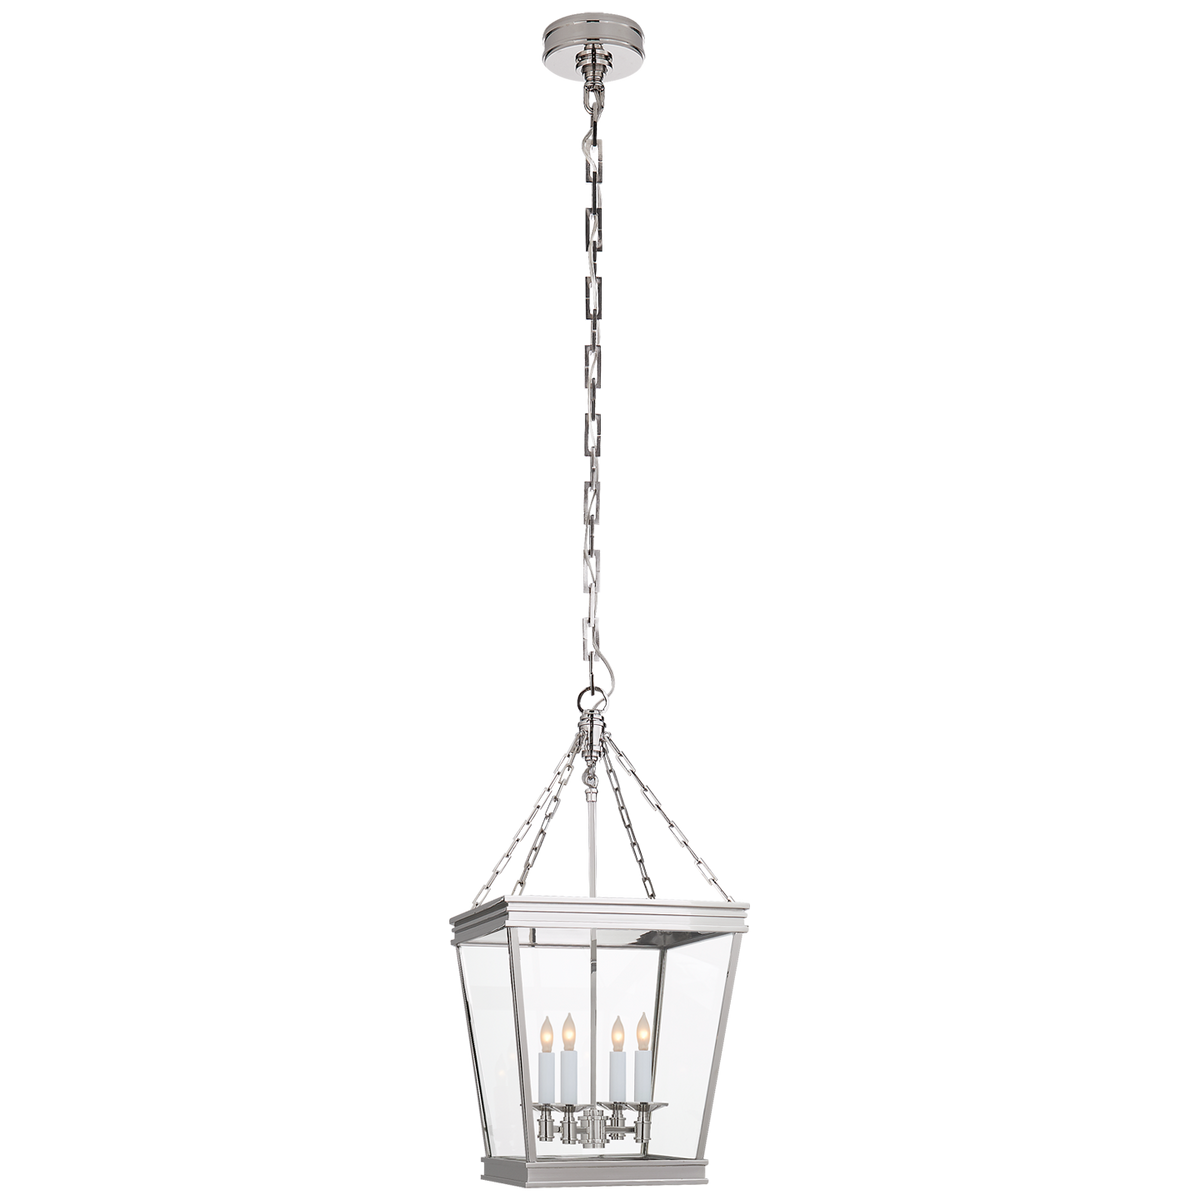 Launceton Lantern Square Small - Polished Nickel with Clear Glass